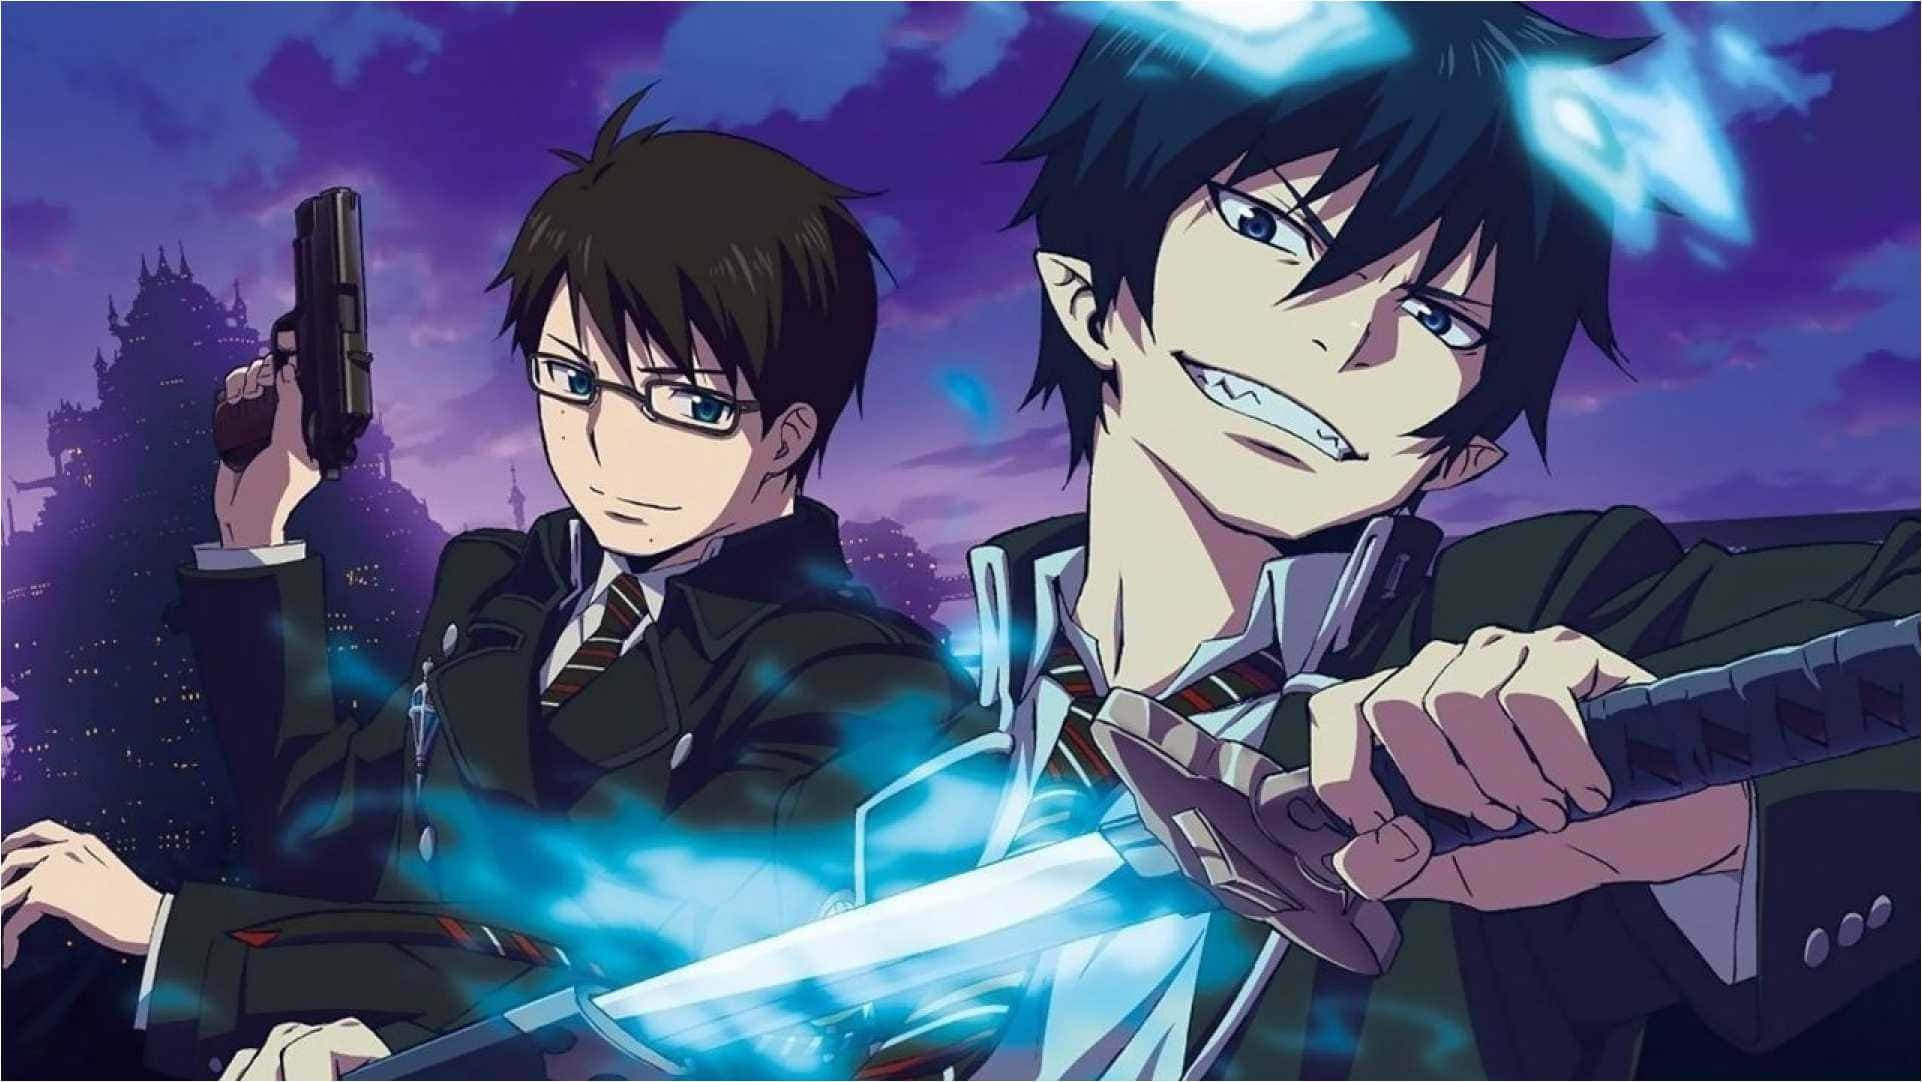 Protagonist Rin Okumura from the anime Blue Exorcist